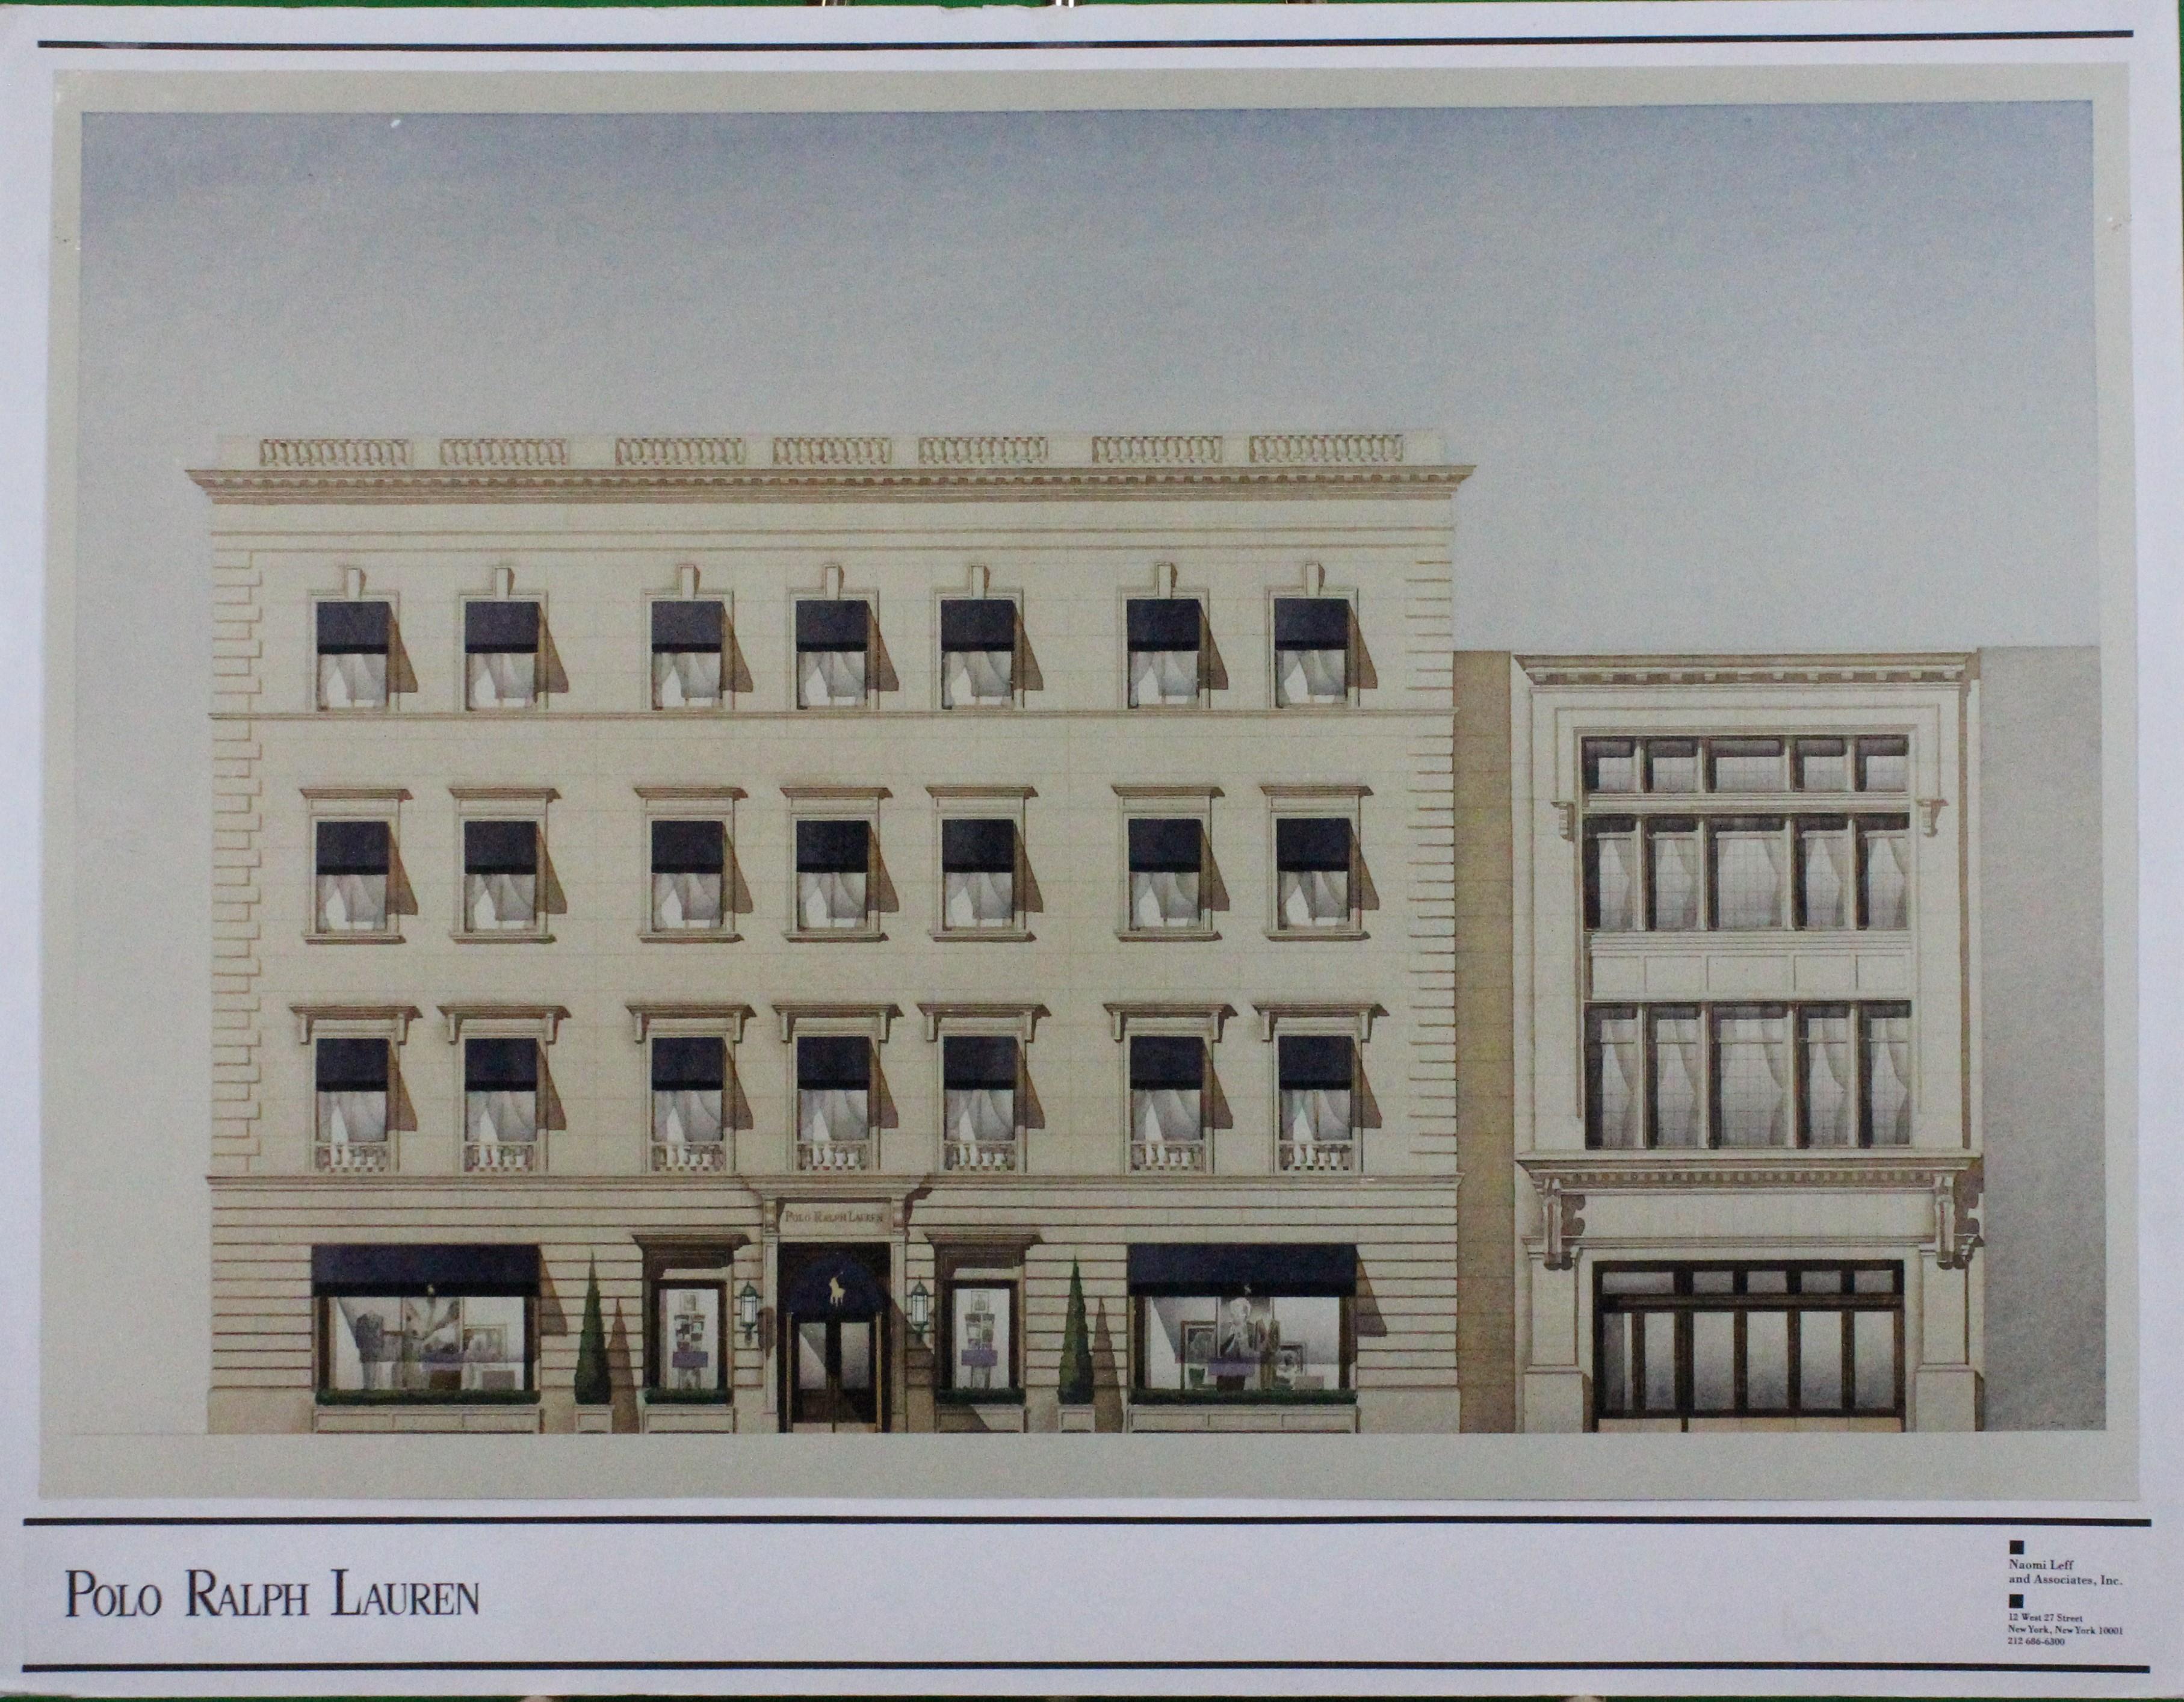 Unknown Landscape Print - "Polo Ralph Lauren Chicago" c1997 Architectural Rendering by Naomi Leff Assoc